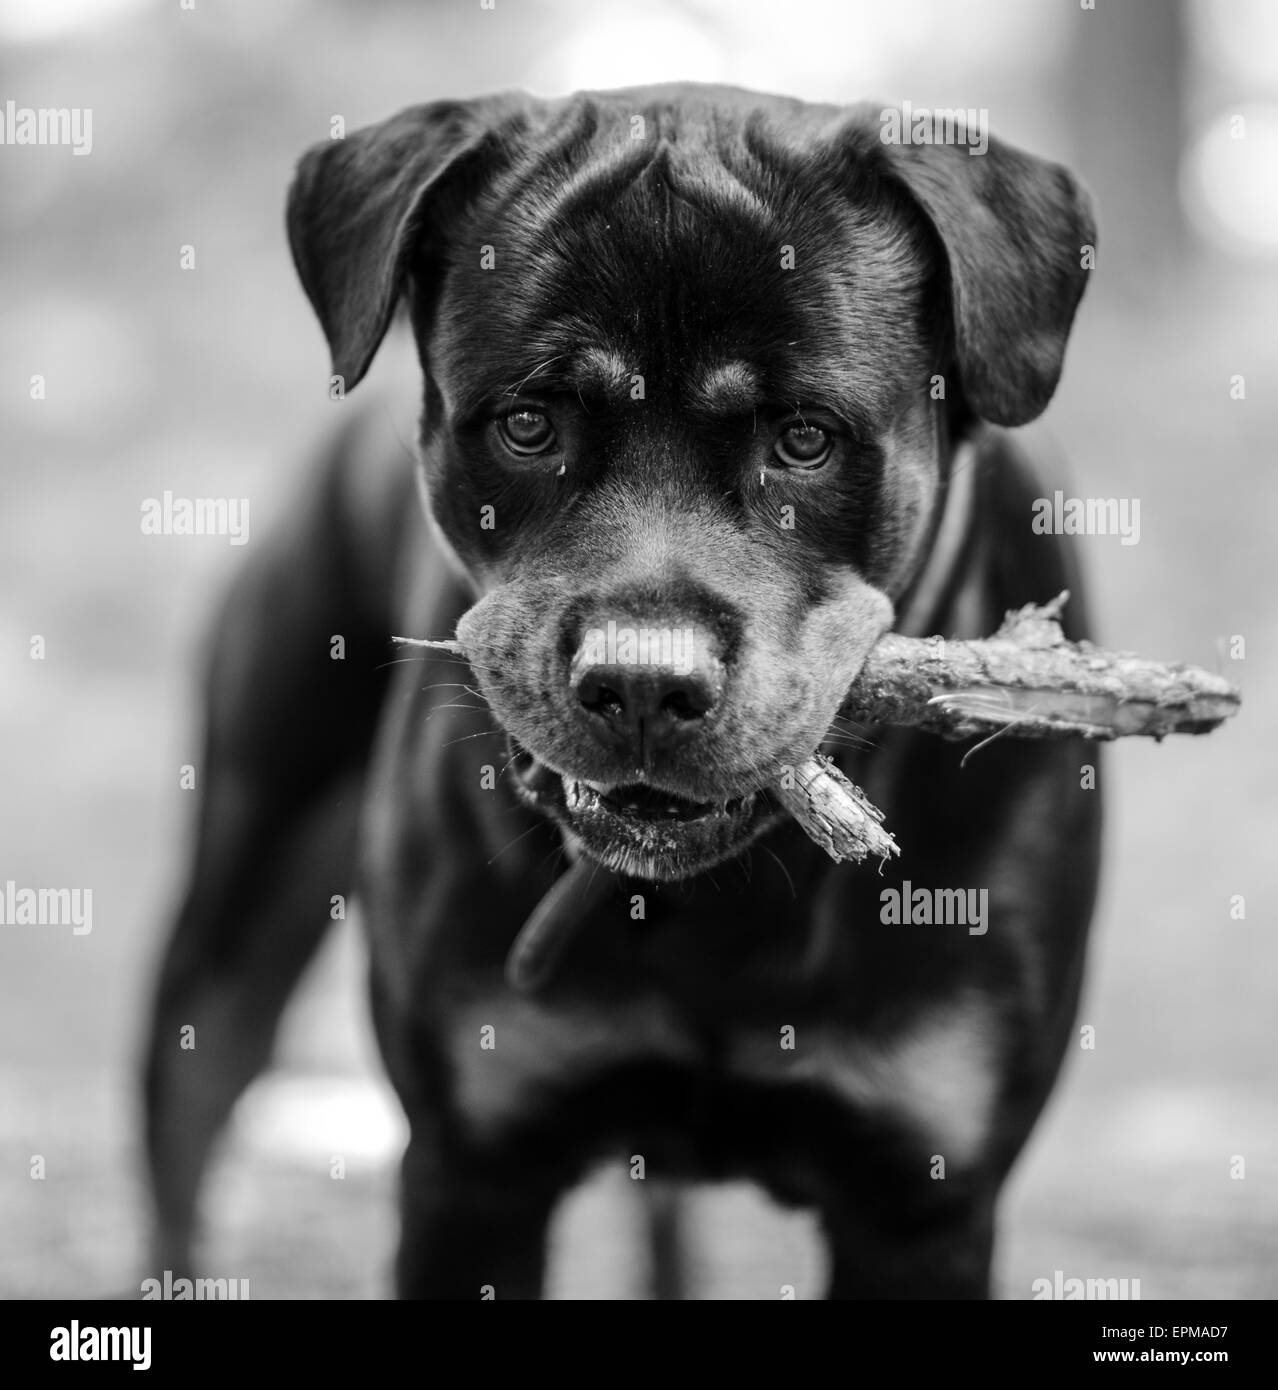 Rottweiler portrait with stick in mouth ready for playing Stock Photo